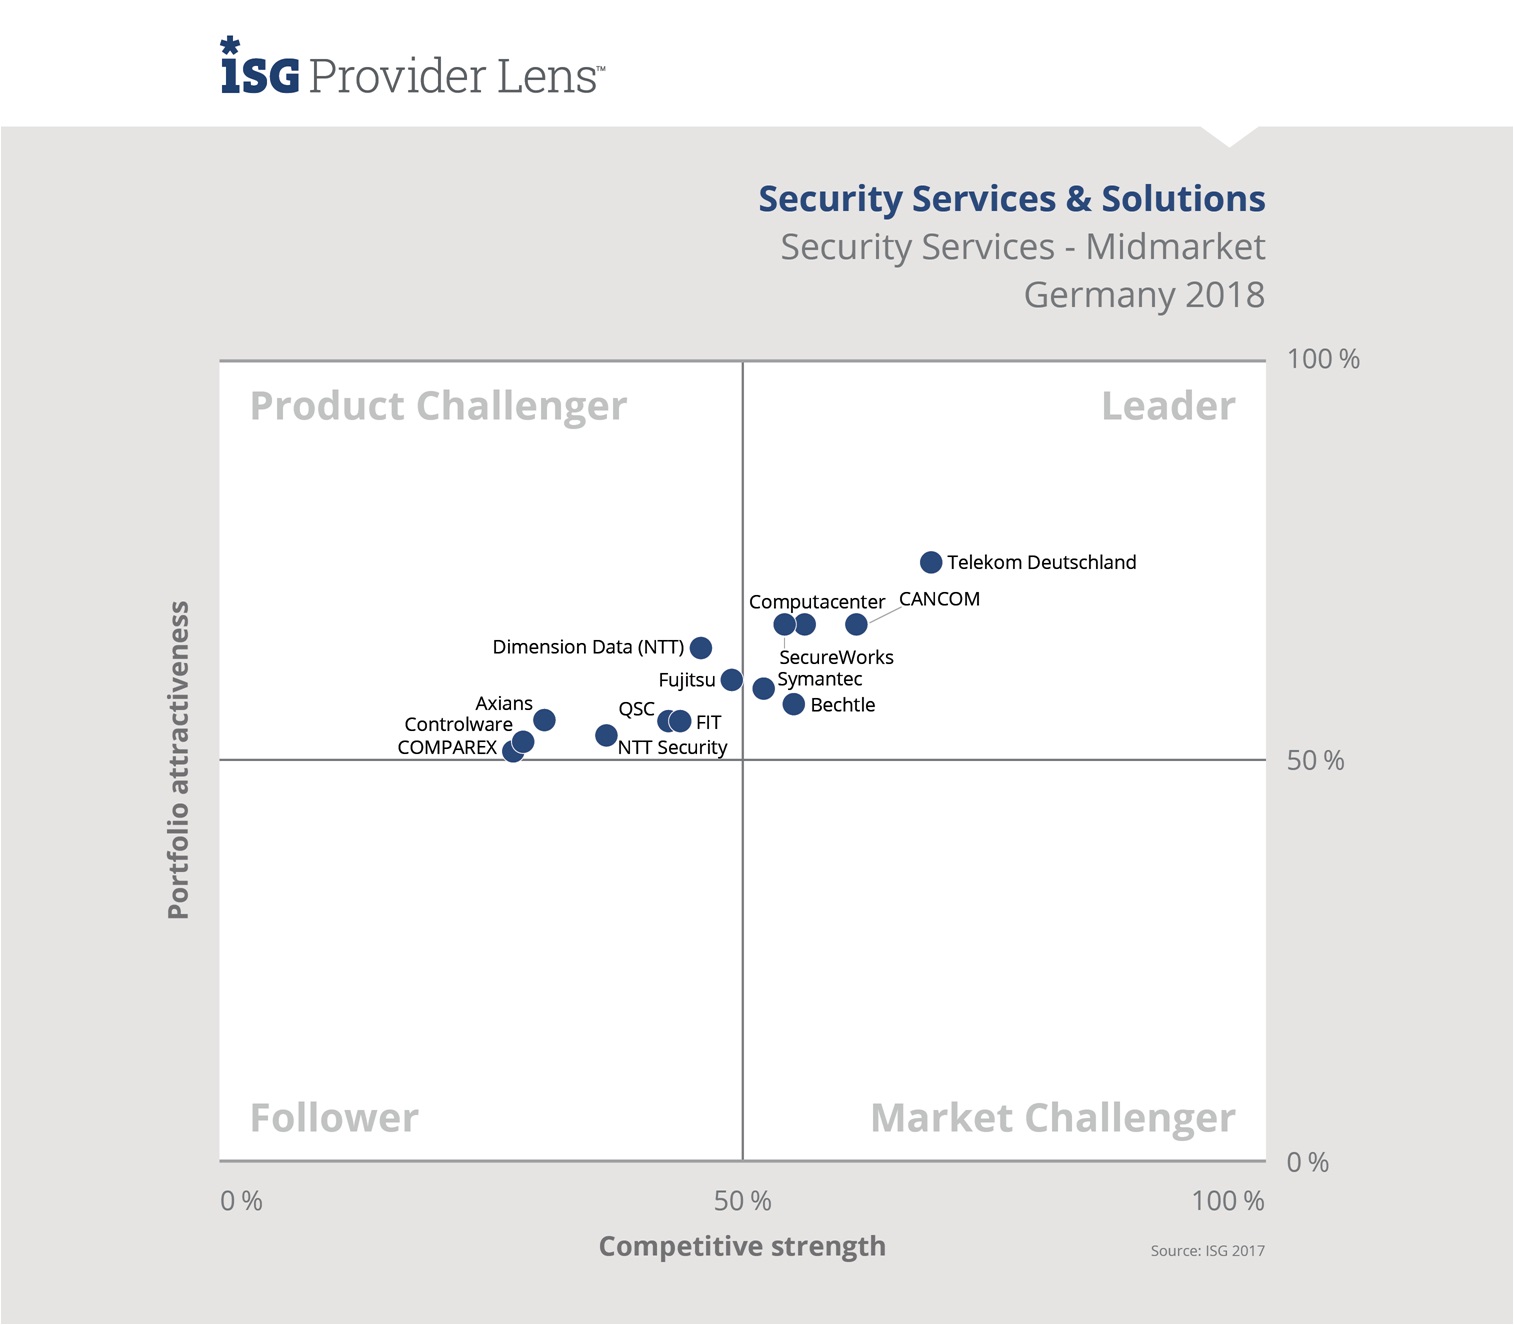 ISG Provider Lens 2018 Security Services & Solutions